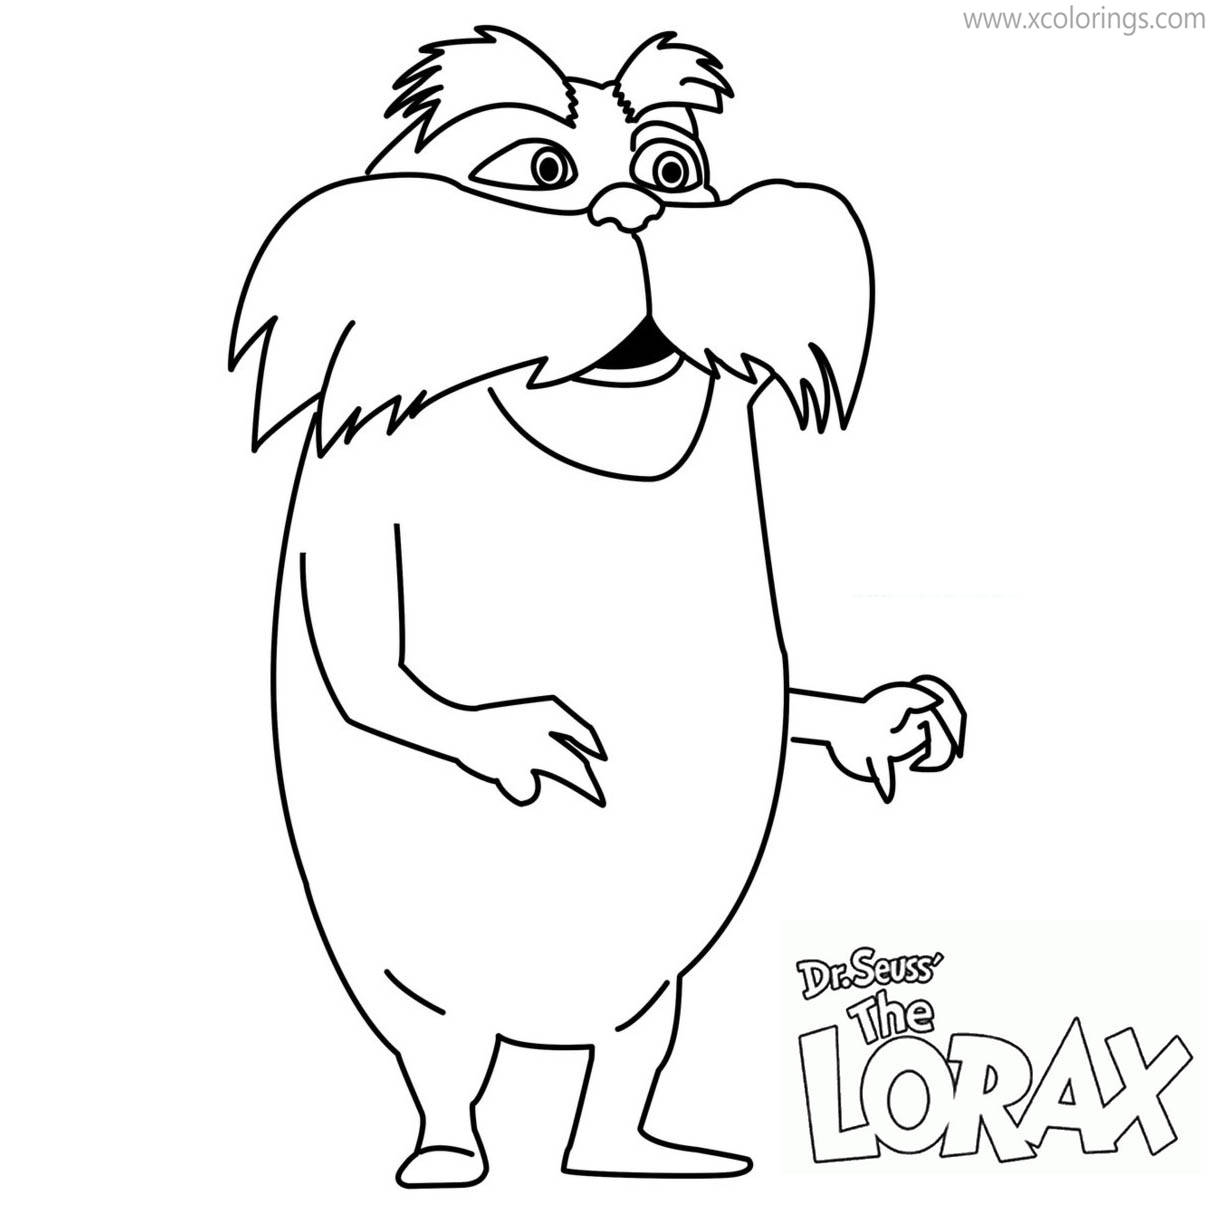 Free Lorax Coloring Pages Easy for Kids printable